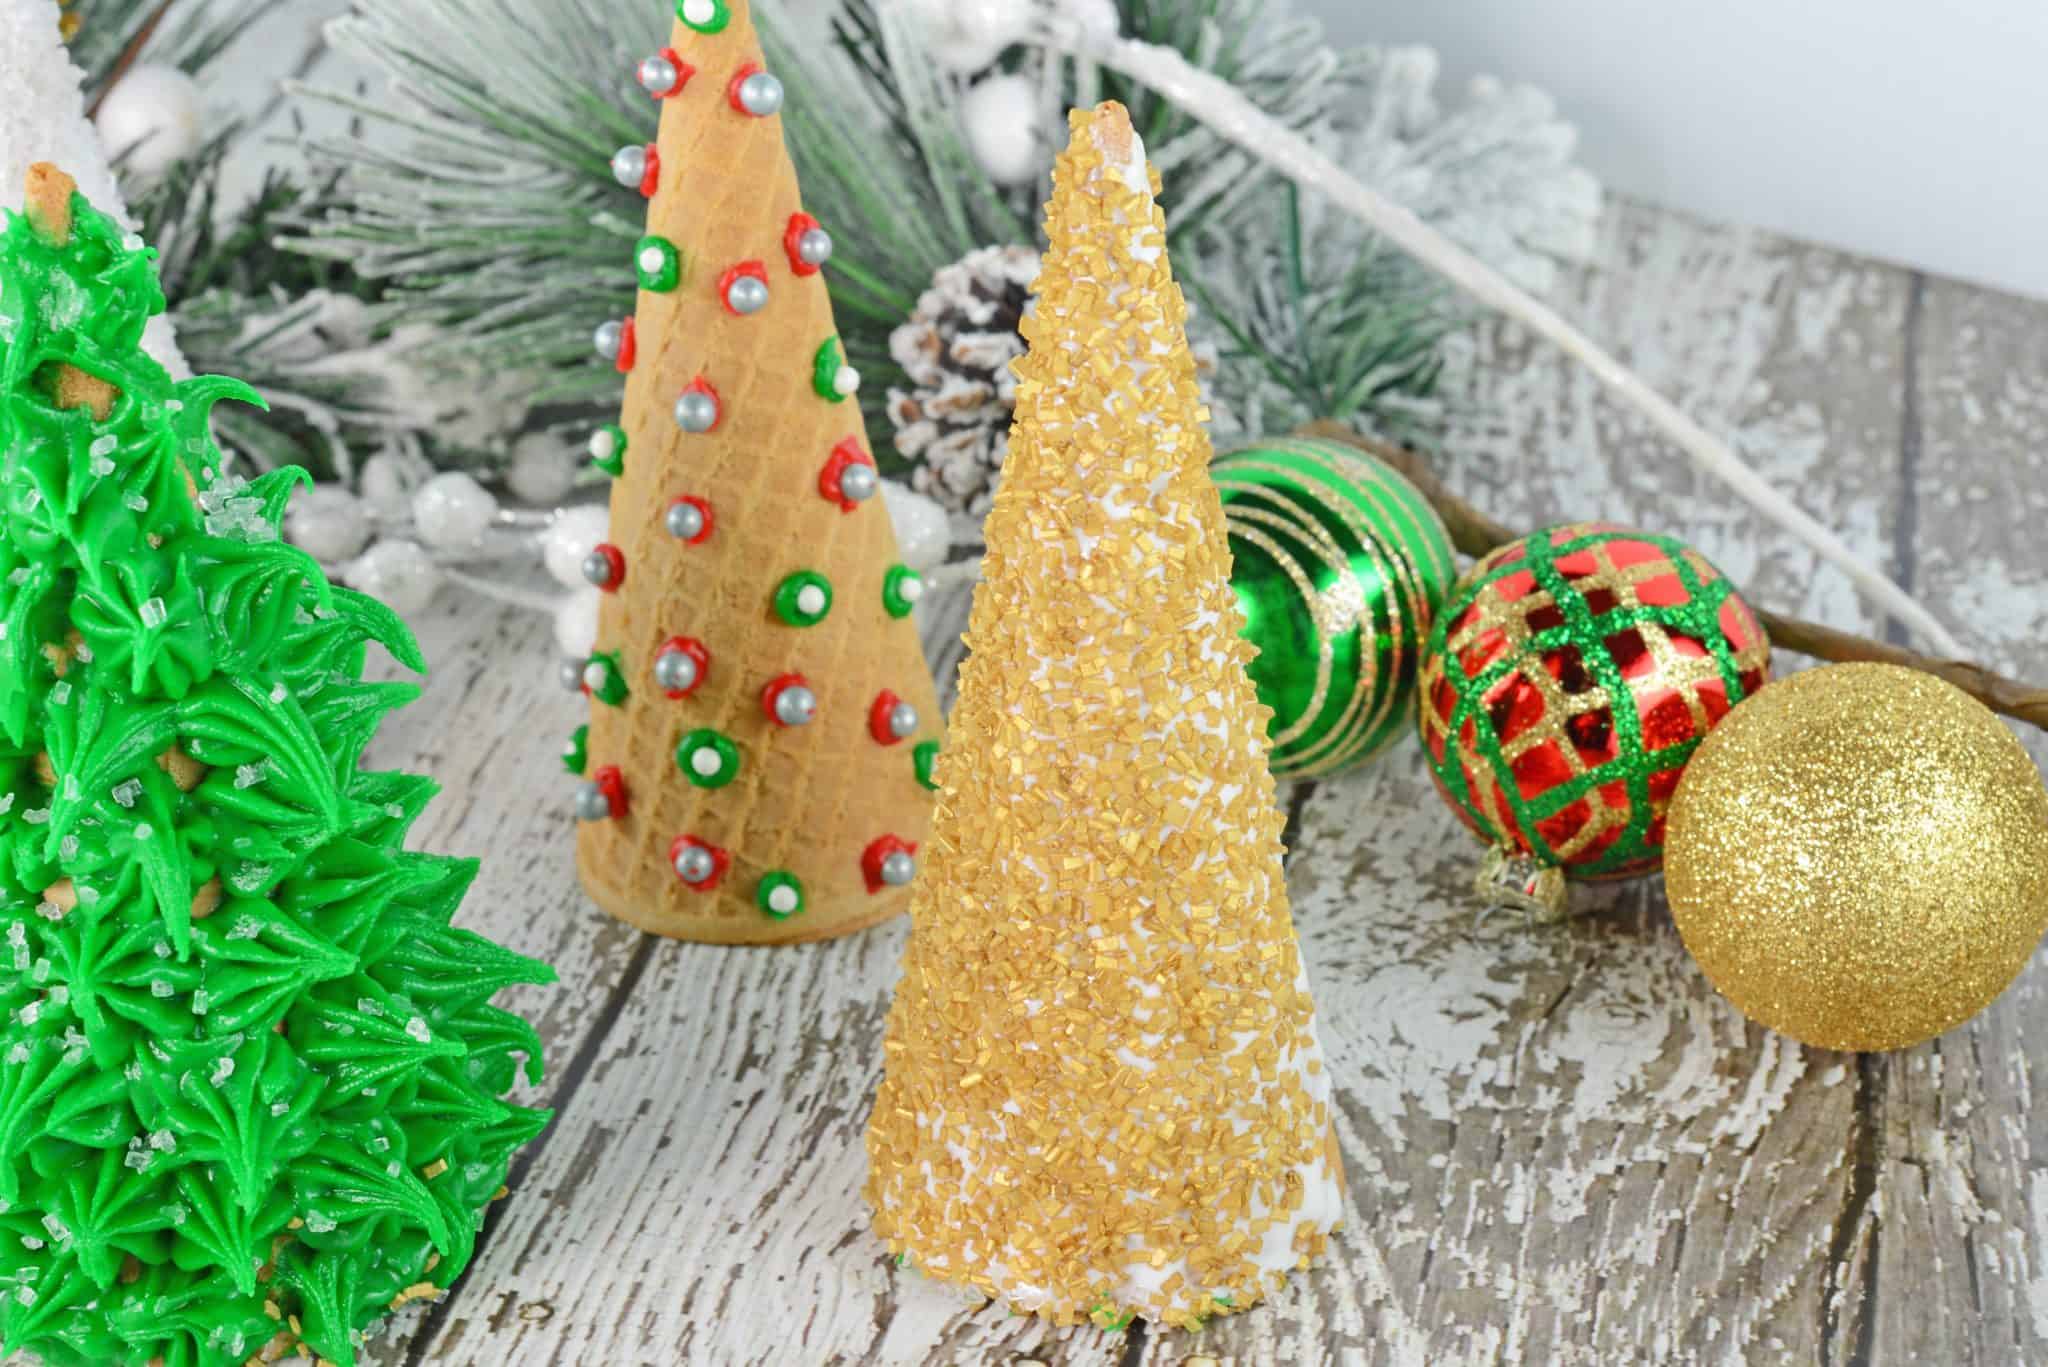 Christmas Tree Cake Cones are filled with cake and frosting and then festively decorated and a fun holiday activity for kids.